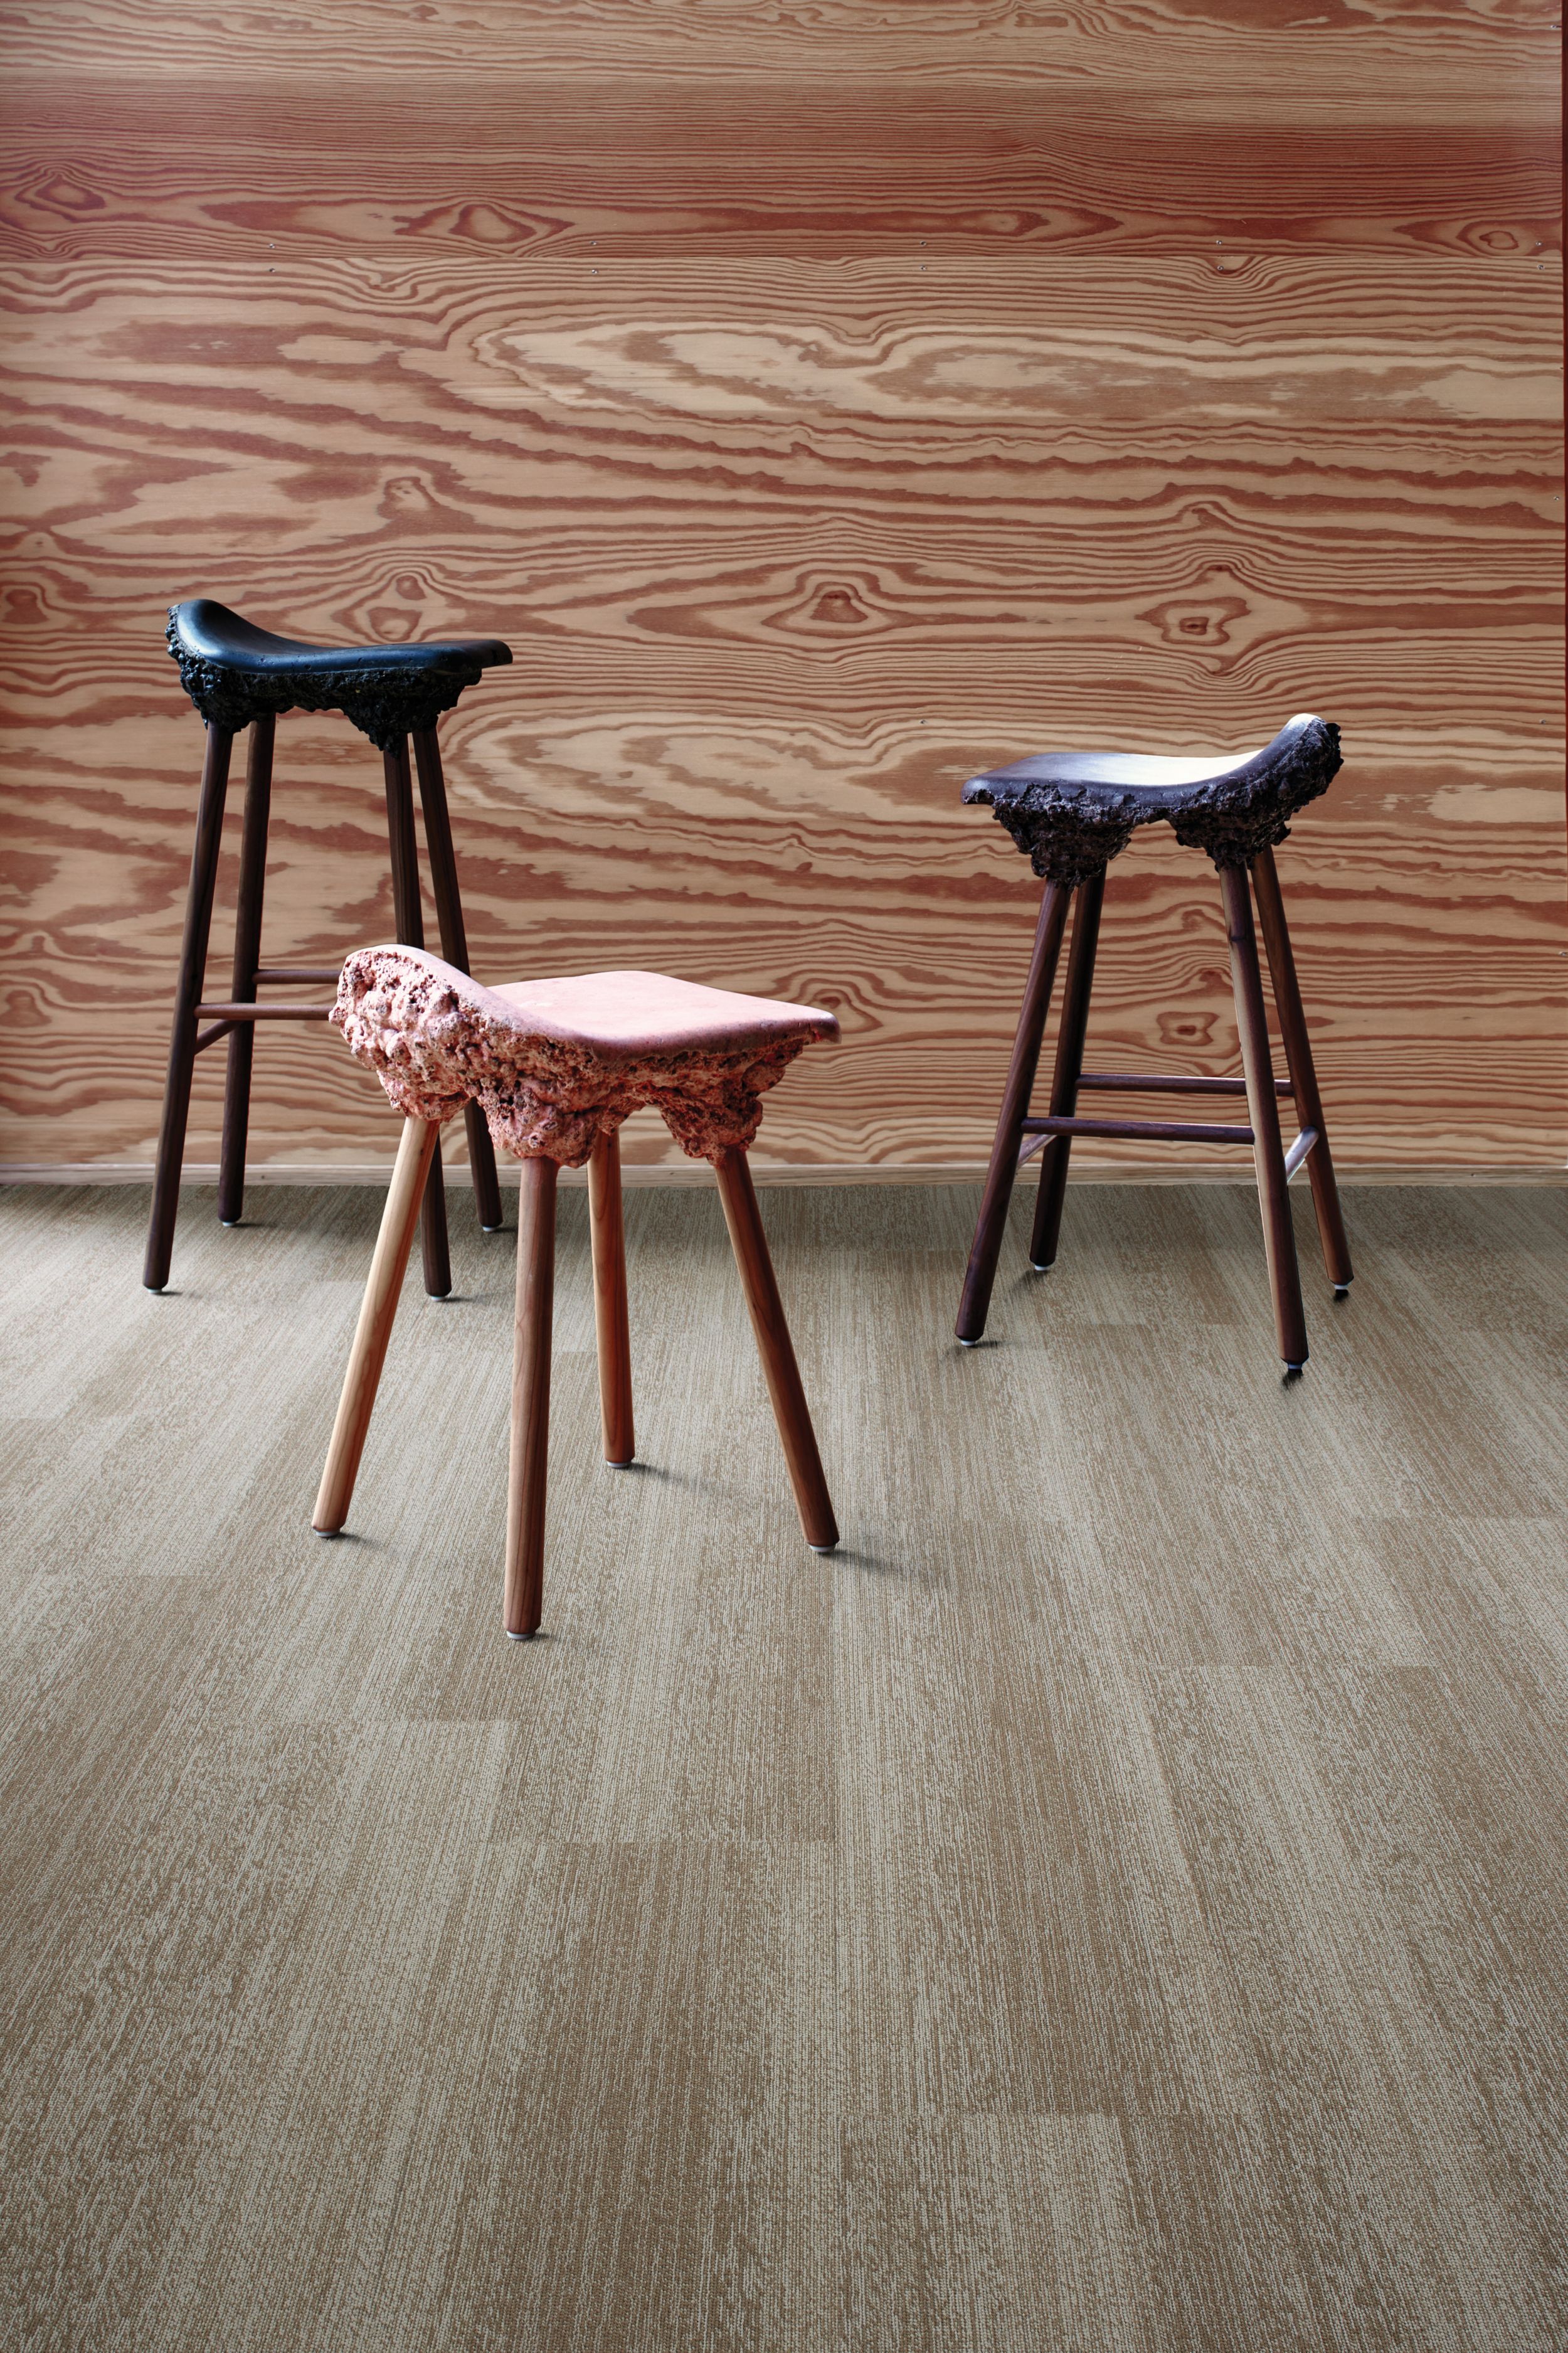 Interface Touch of Timber plank carpet tile in room with plywood wall and three unusual stools número de imagen 6